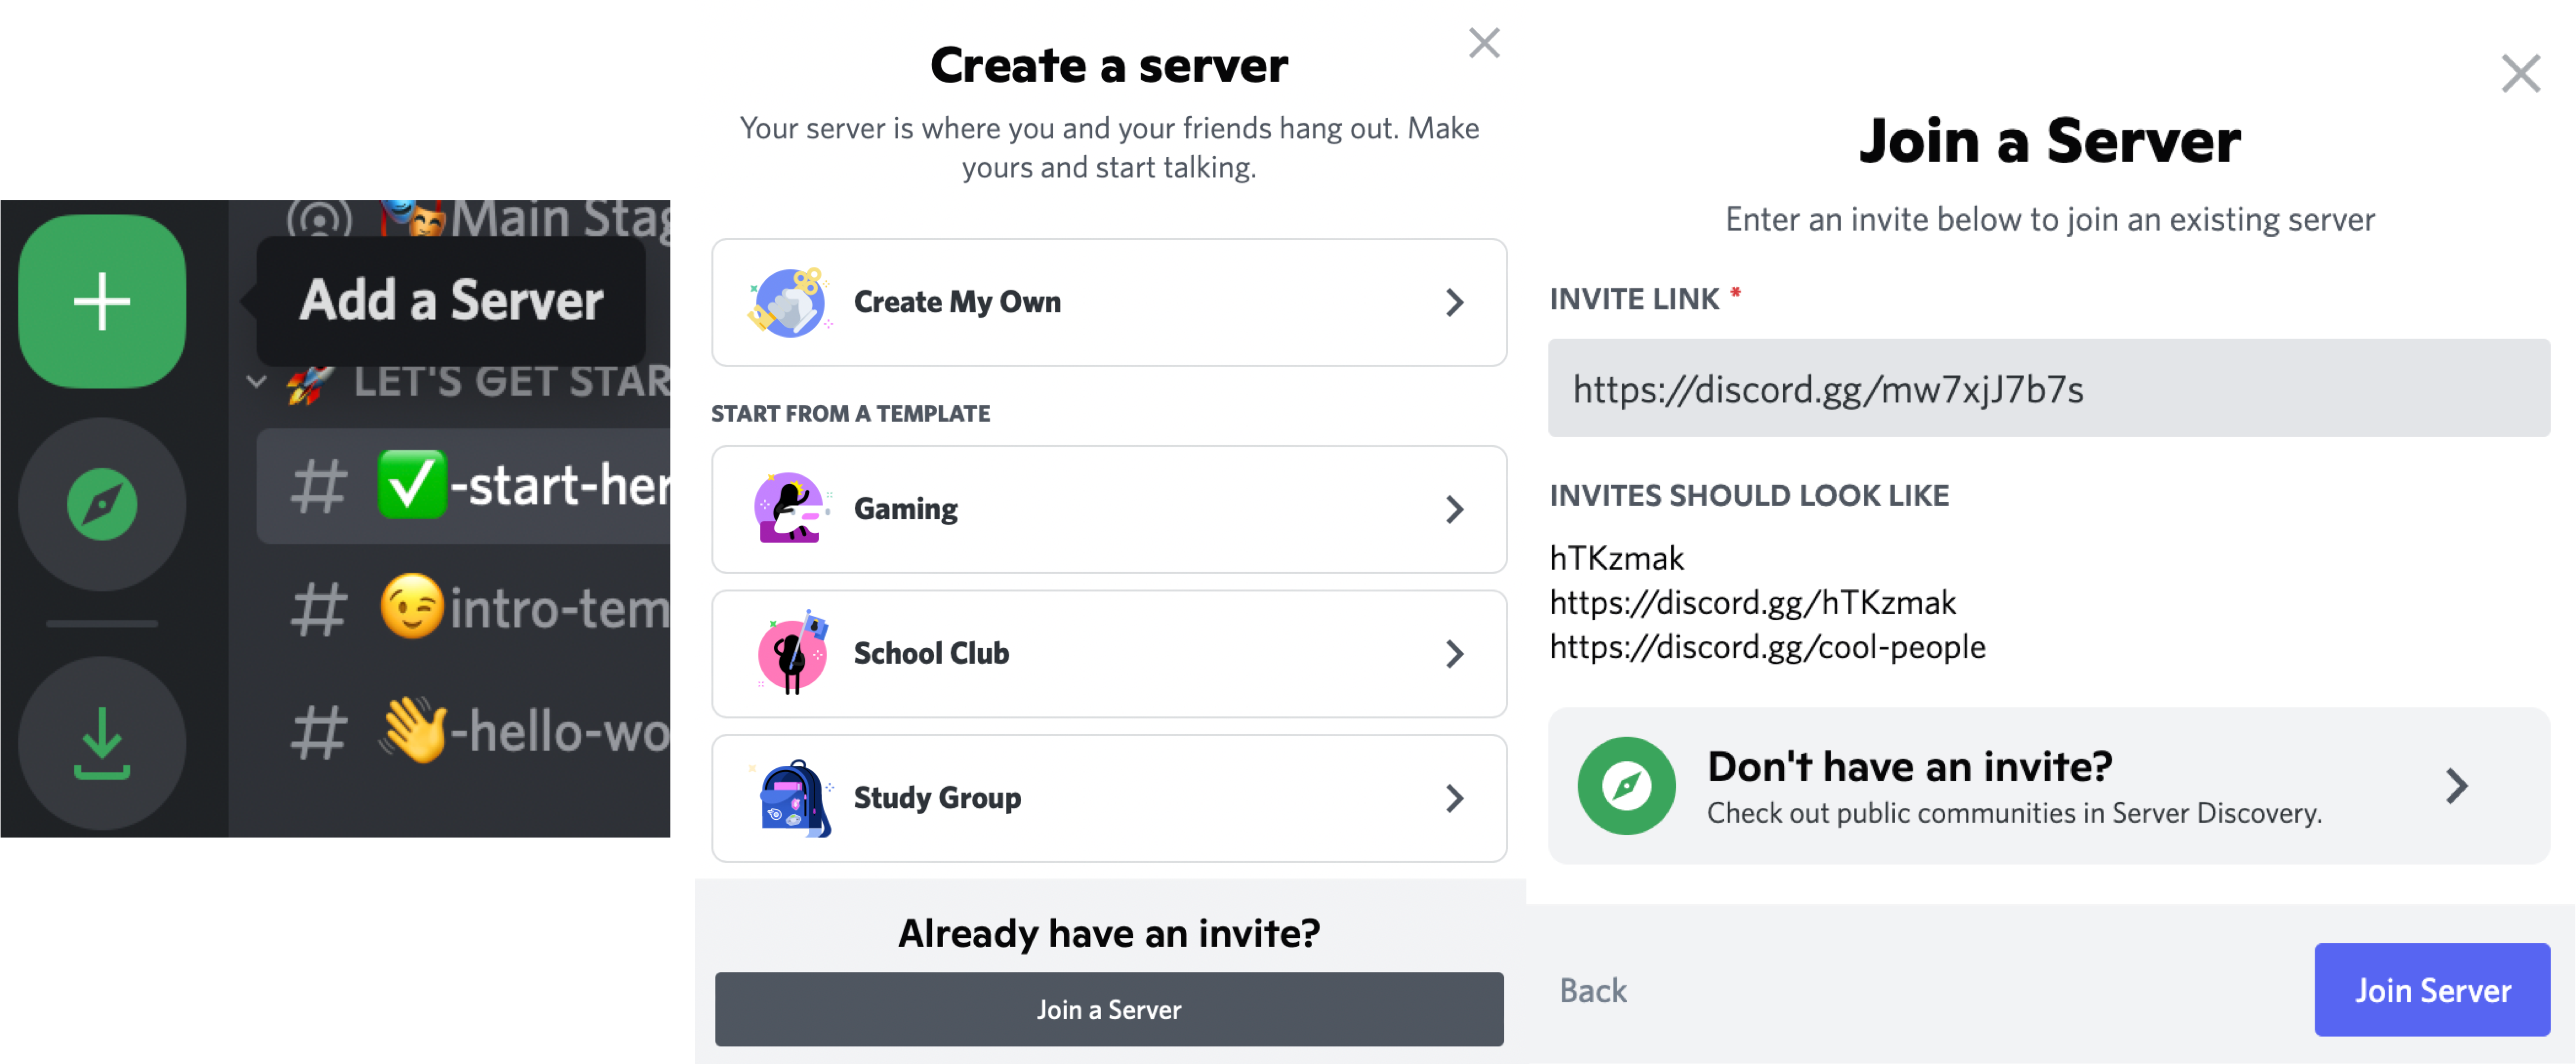 You can add a server in your discord app by clicking the "+" button in the left tab